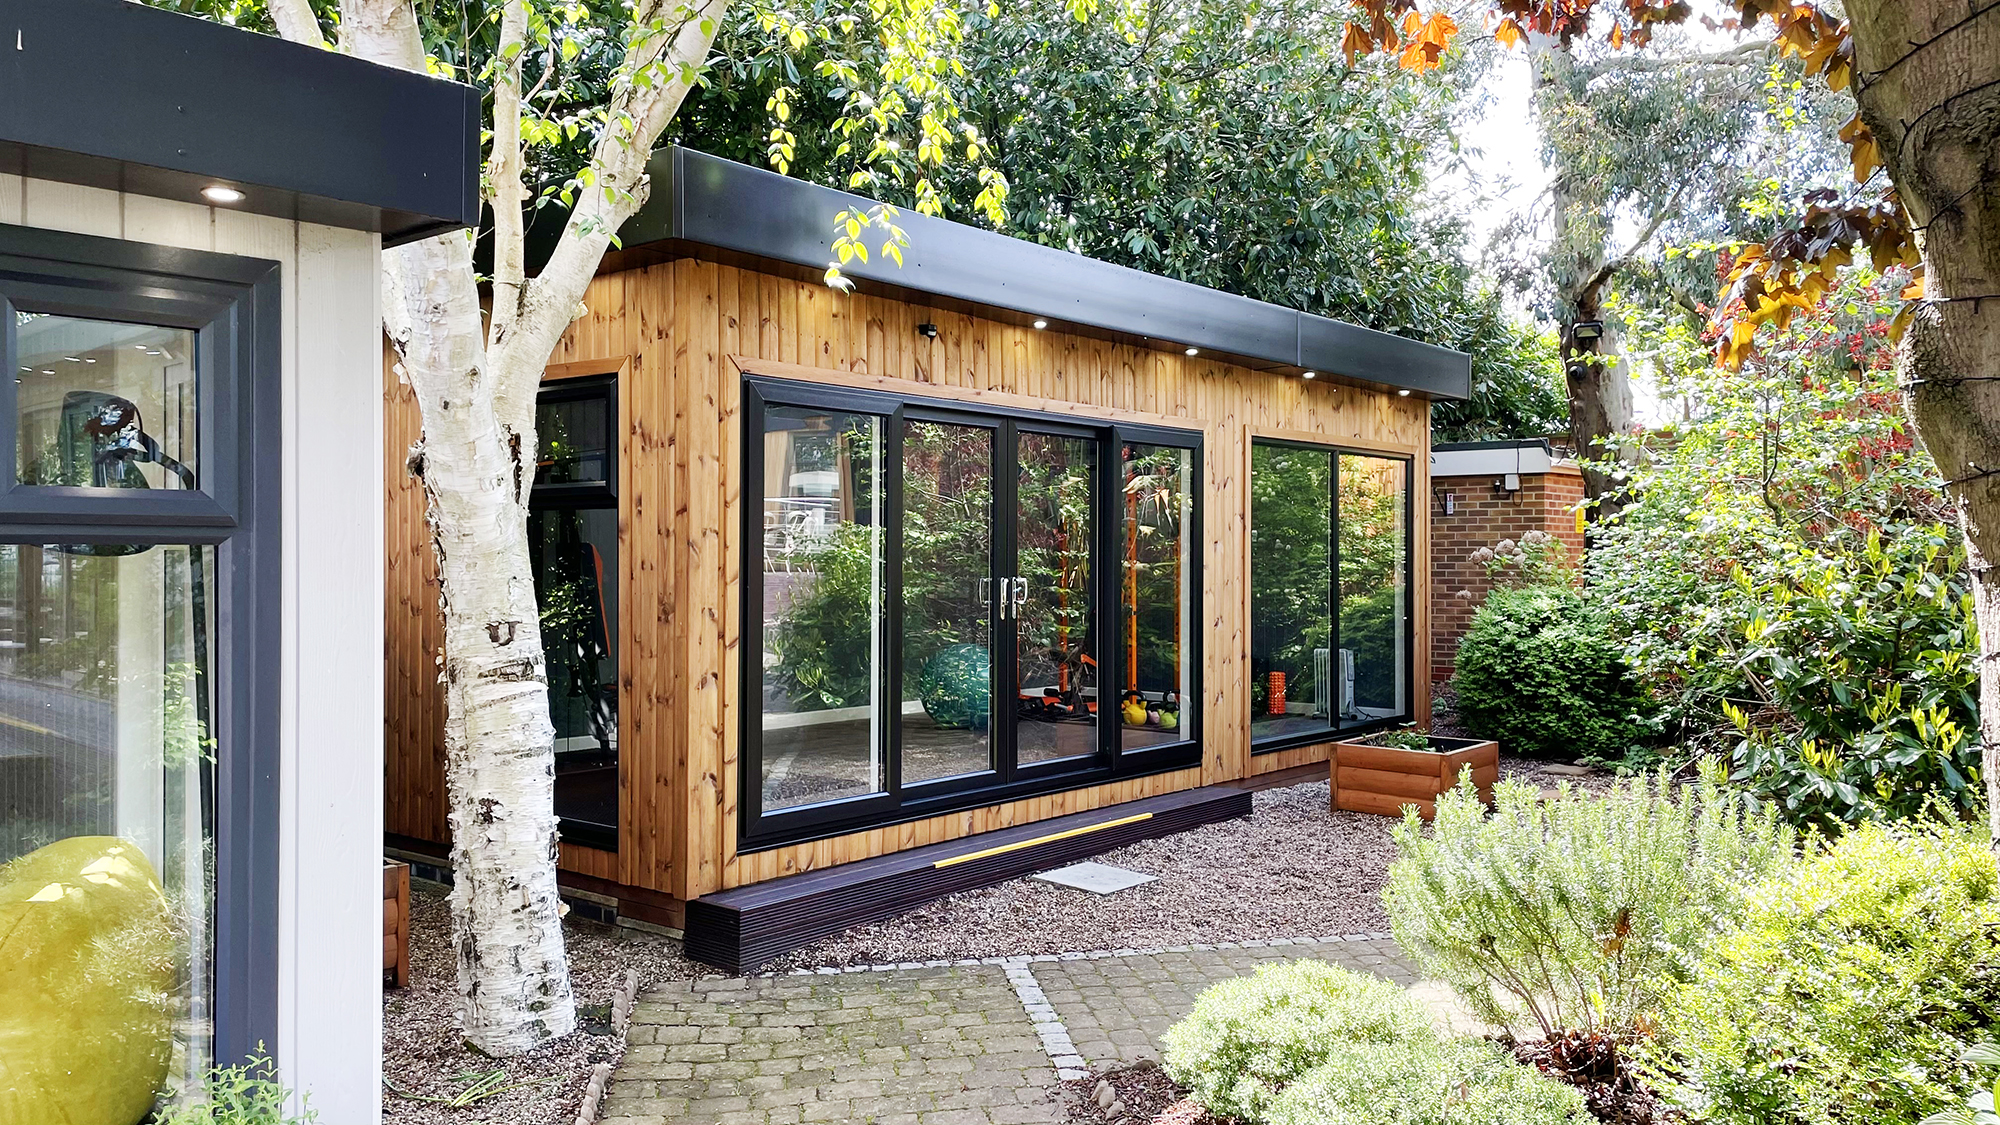 Exterior hot of an extra tall Garden Room Gym in redwood 